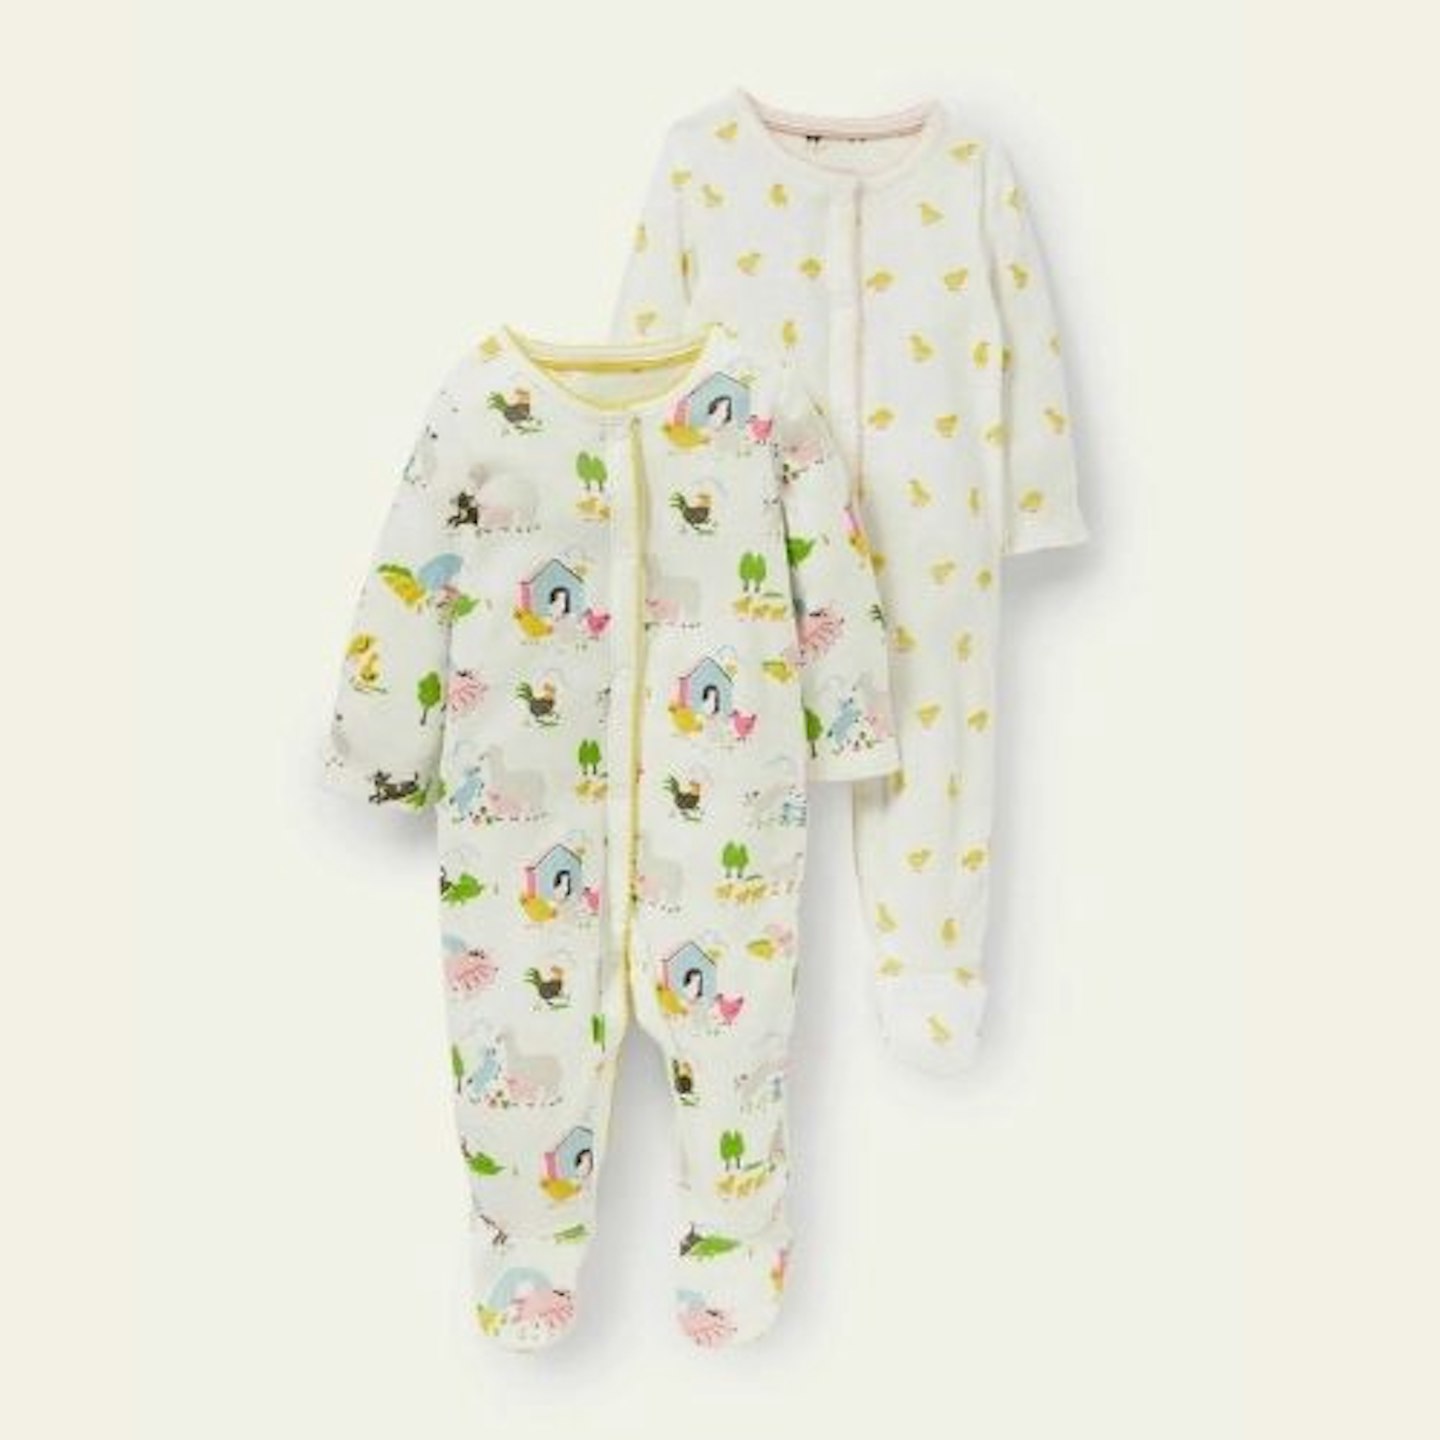 GOTS Organic 2 Pack Sleepsuit Ivory Farmyard Friends - Twin Matching Outfits